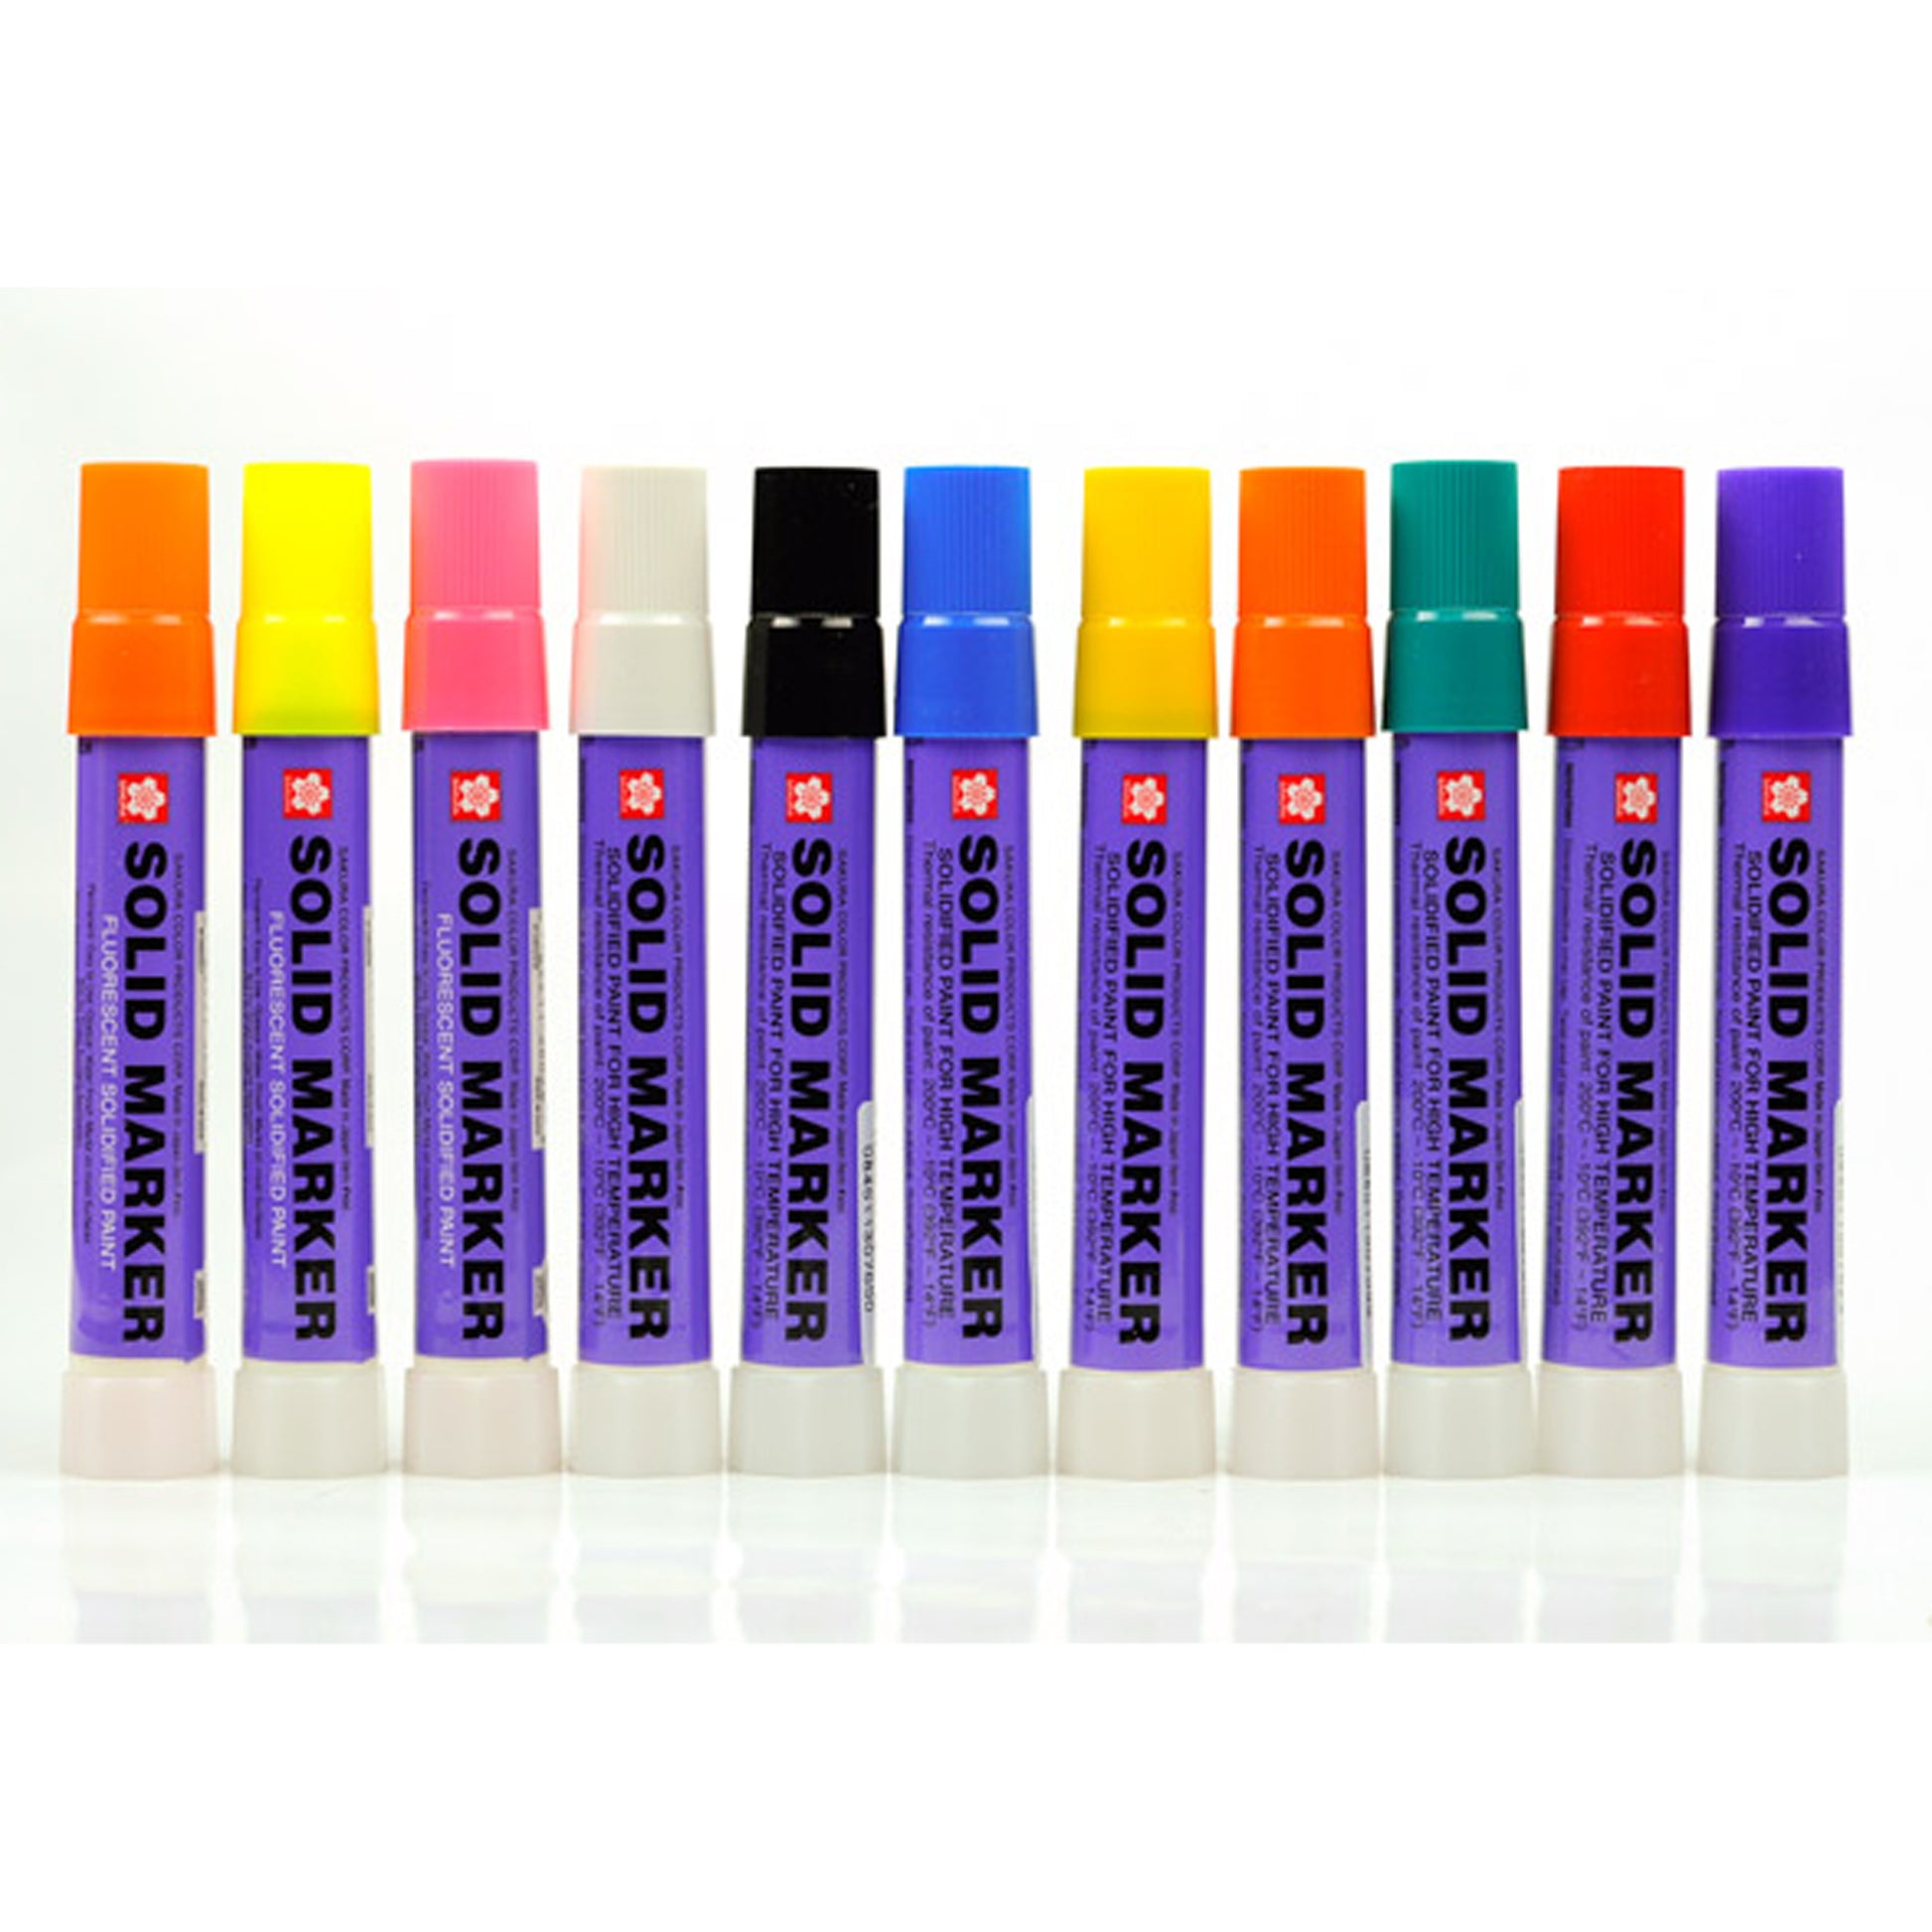 sakura solid markers in a range of different colors